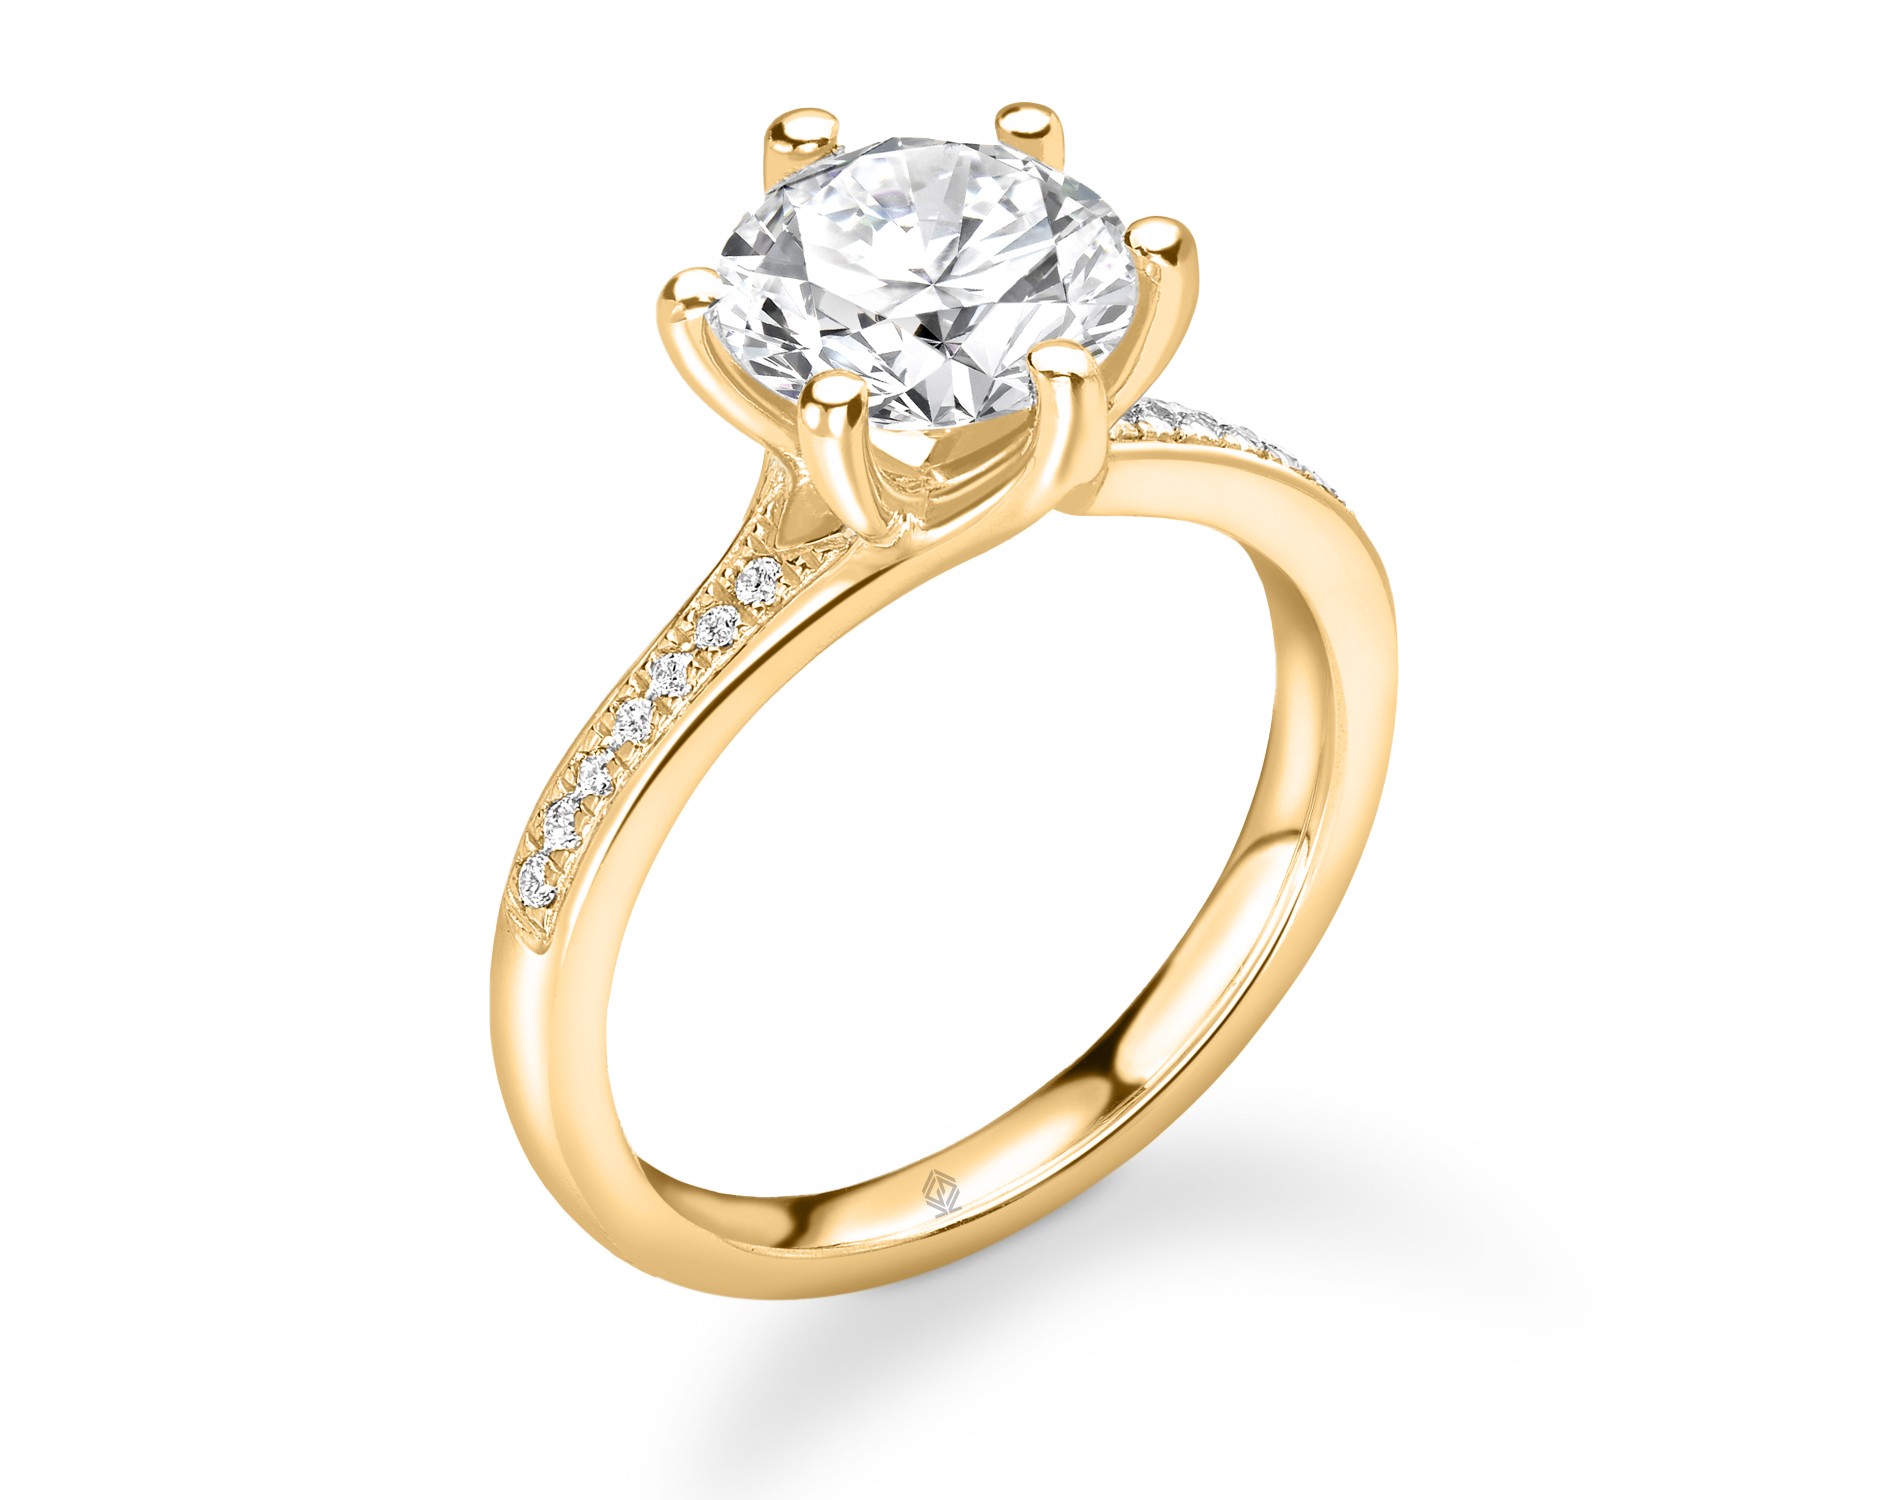 18K YELLOW GOLD ROUND CUT 6 PRONGS DIAMOND ENGAGEMENT RING WITH CHANNEL SET SIDE STONES